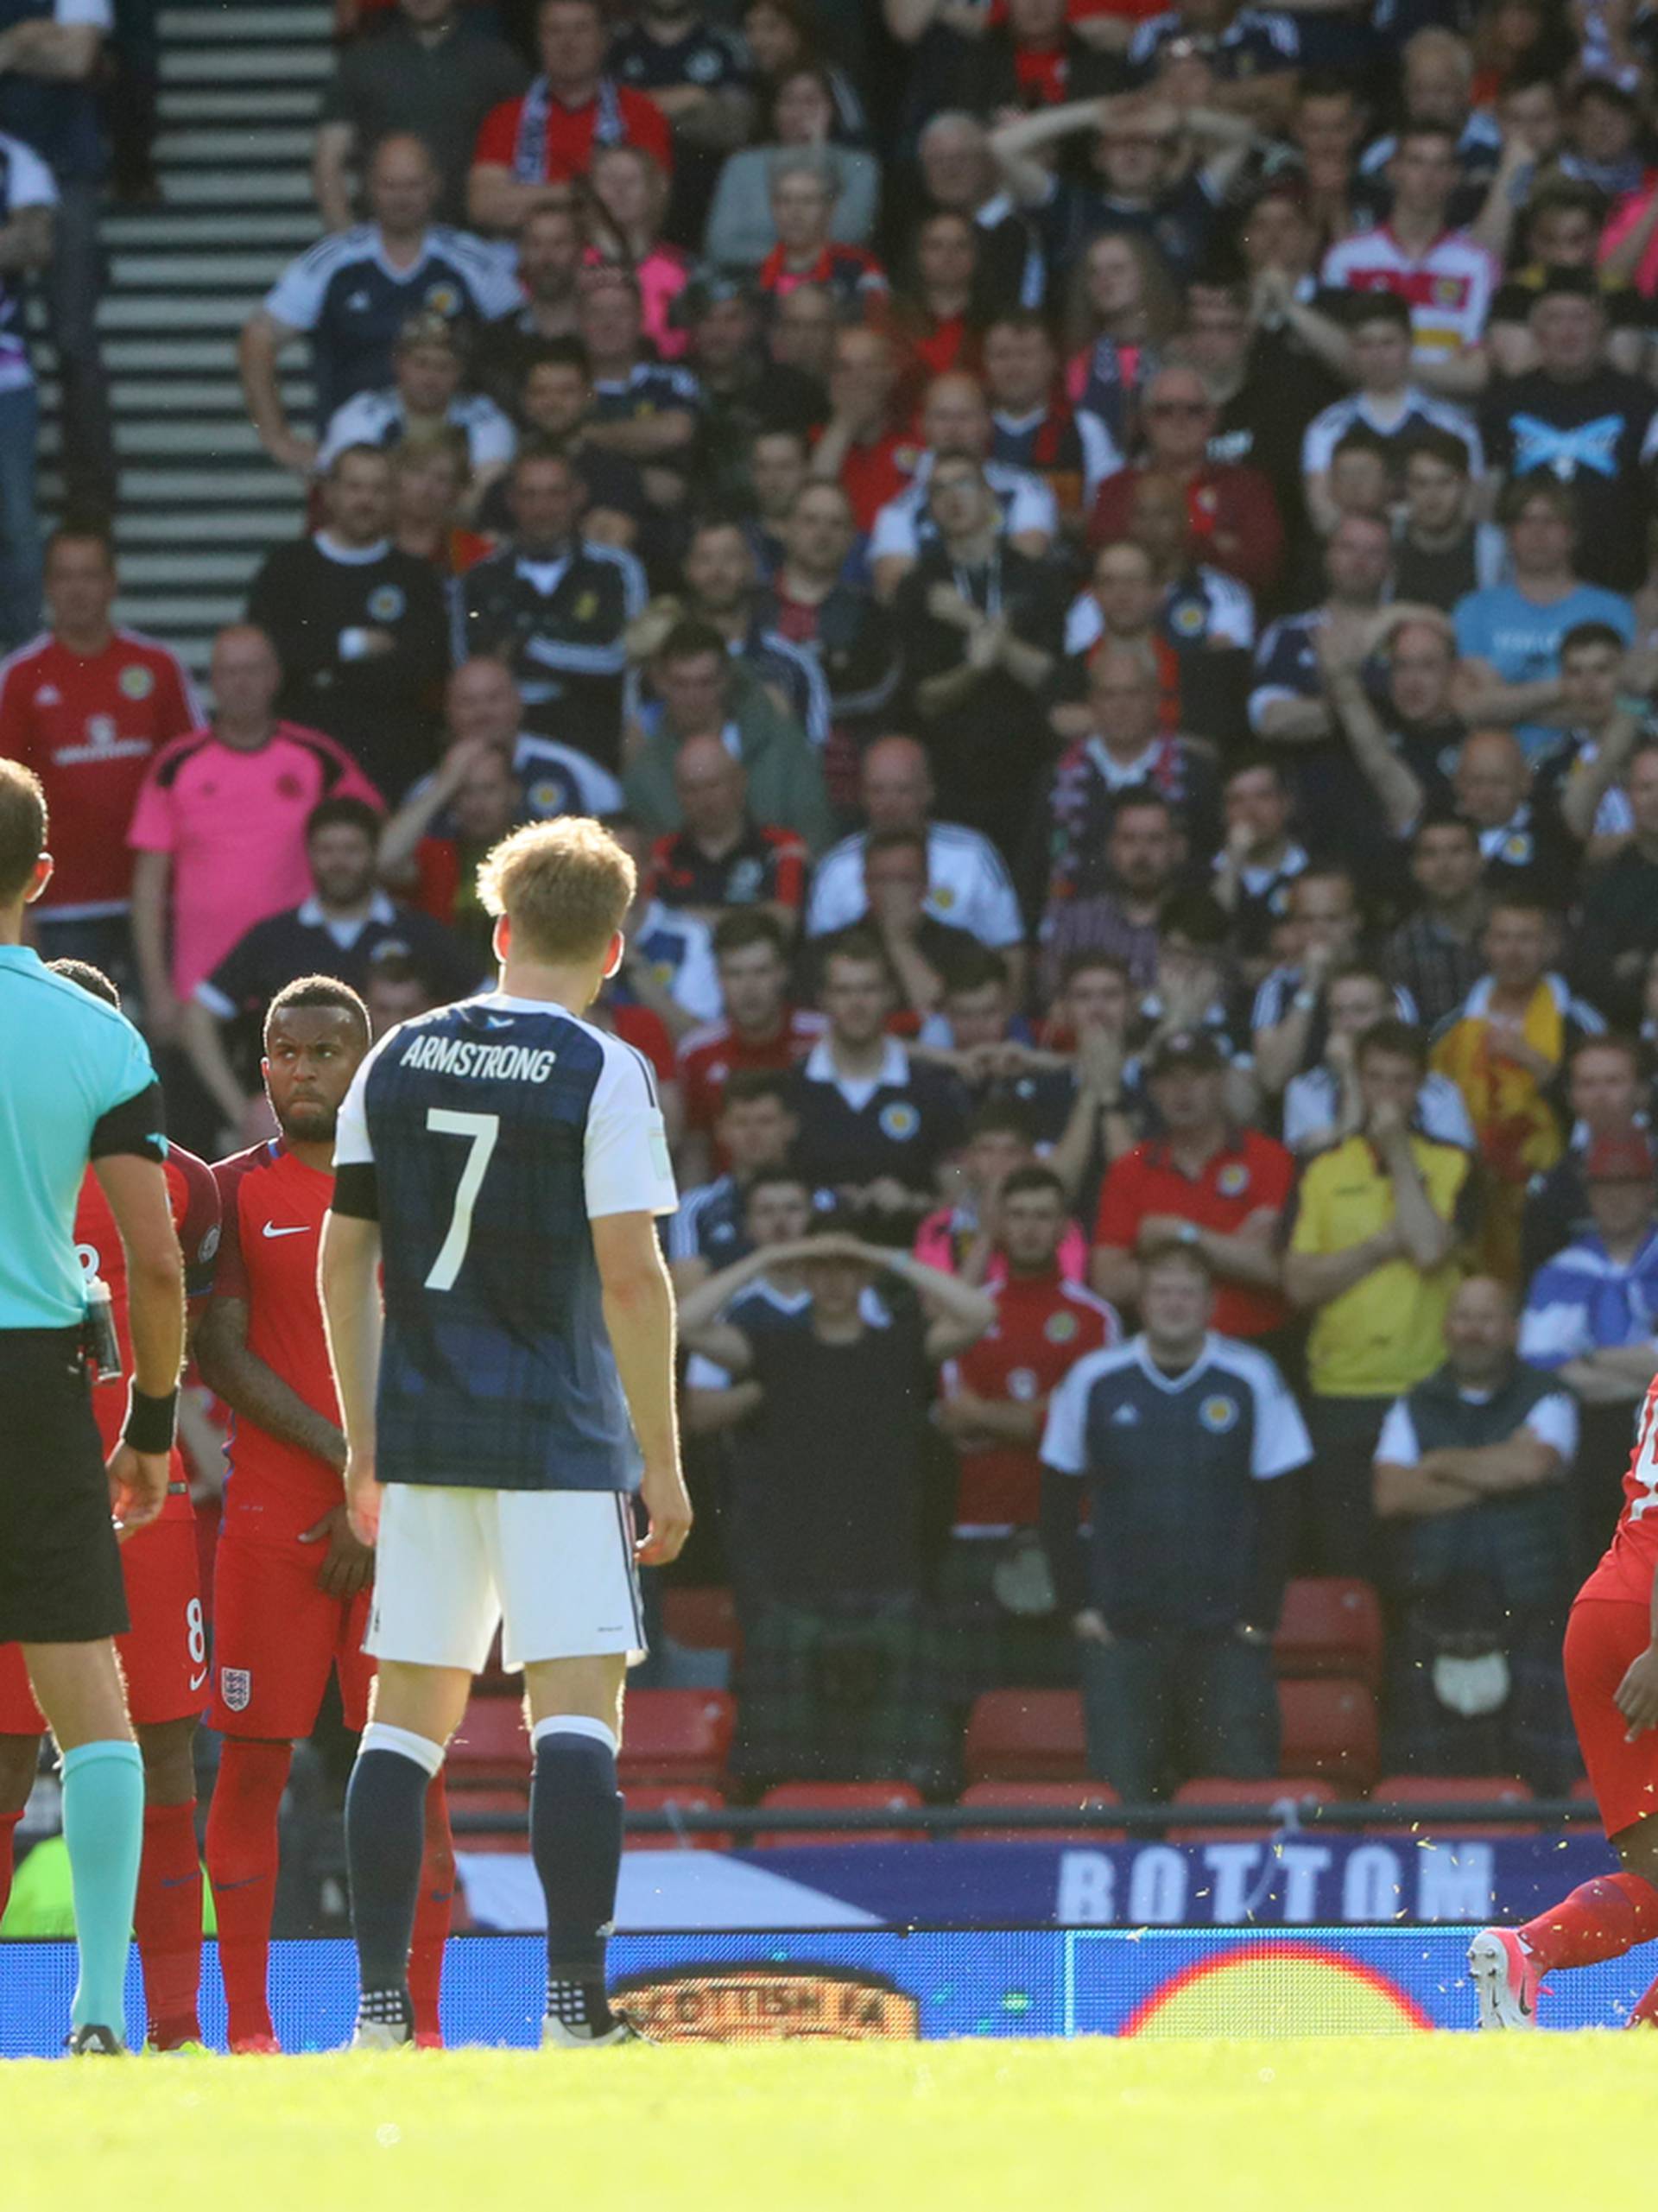 Scotland's Leigh Griffiths scores their first goal from a free kick